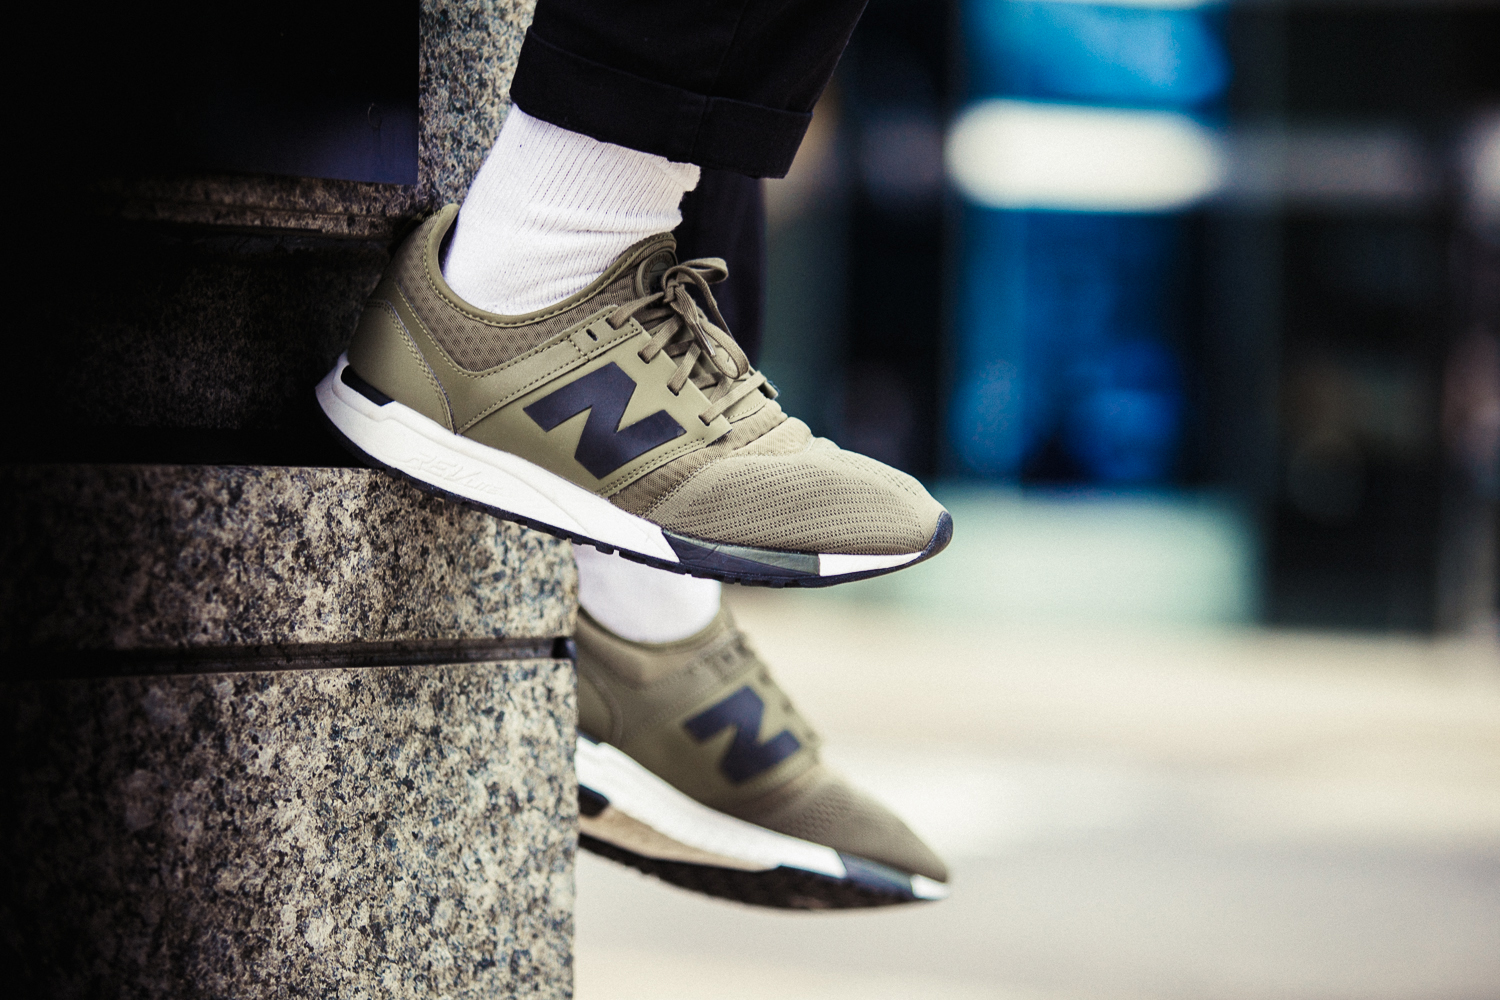 productos quimicos Tumba Relación On Feet: Reviewing the Latest New Balance 247 Sport